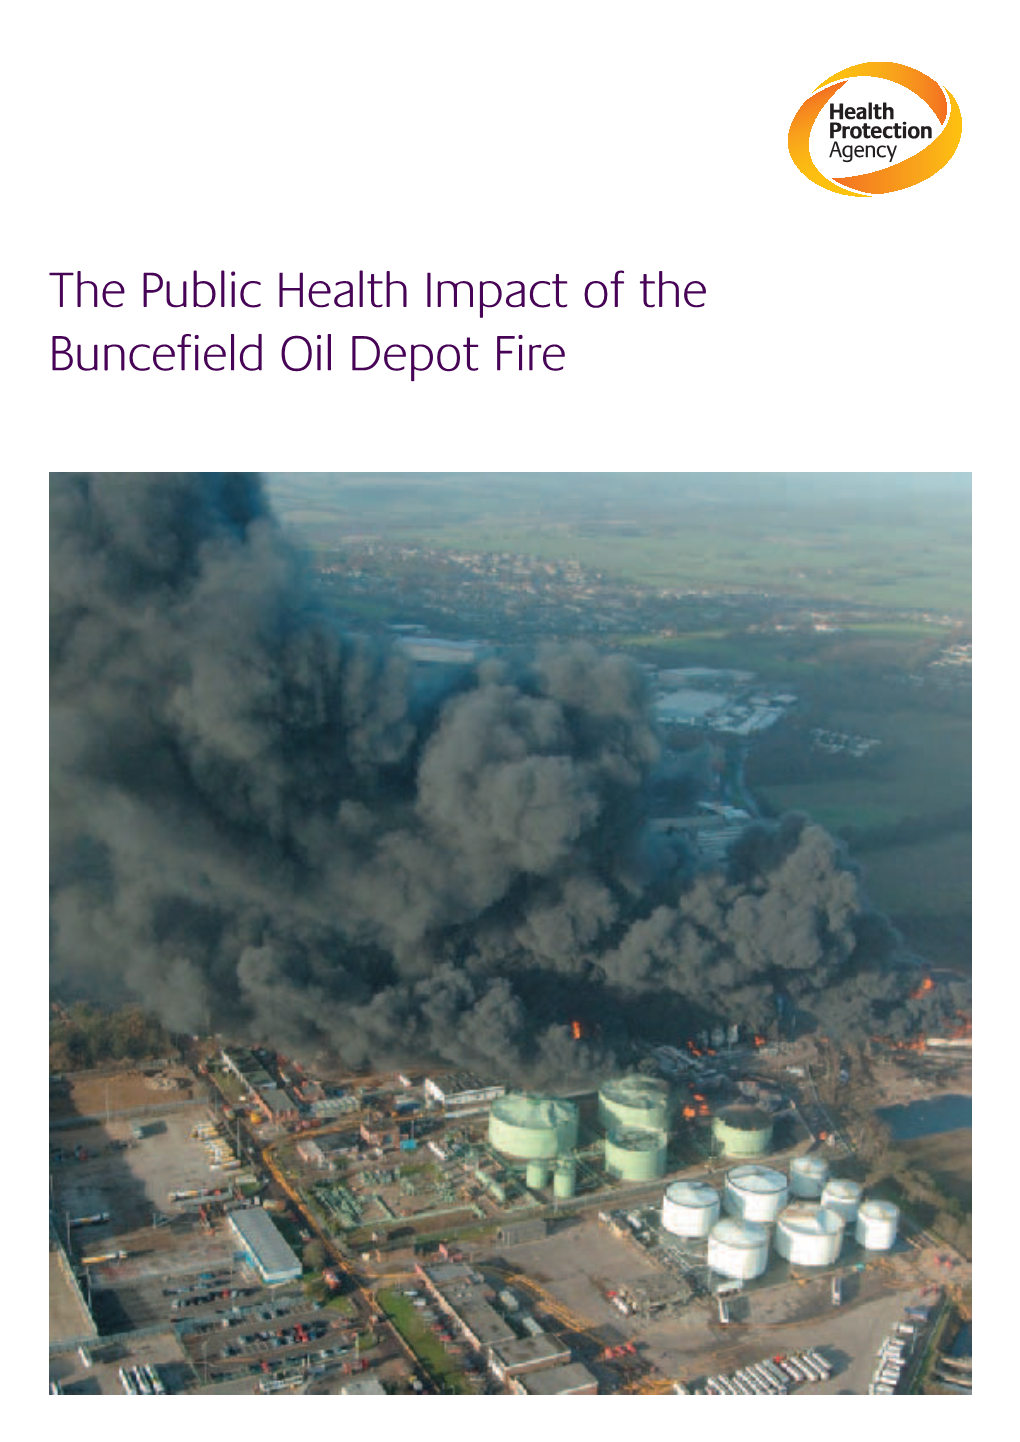 The Public Health Impact of the Buncefield Oil Depot Fire the Public Health Impact of the Buncefield Oil Depot Fire